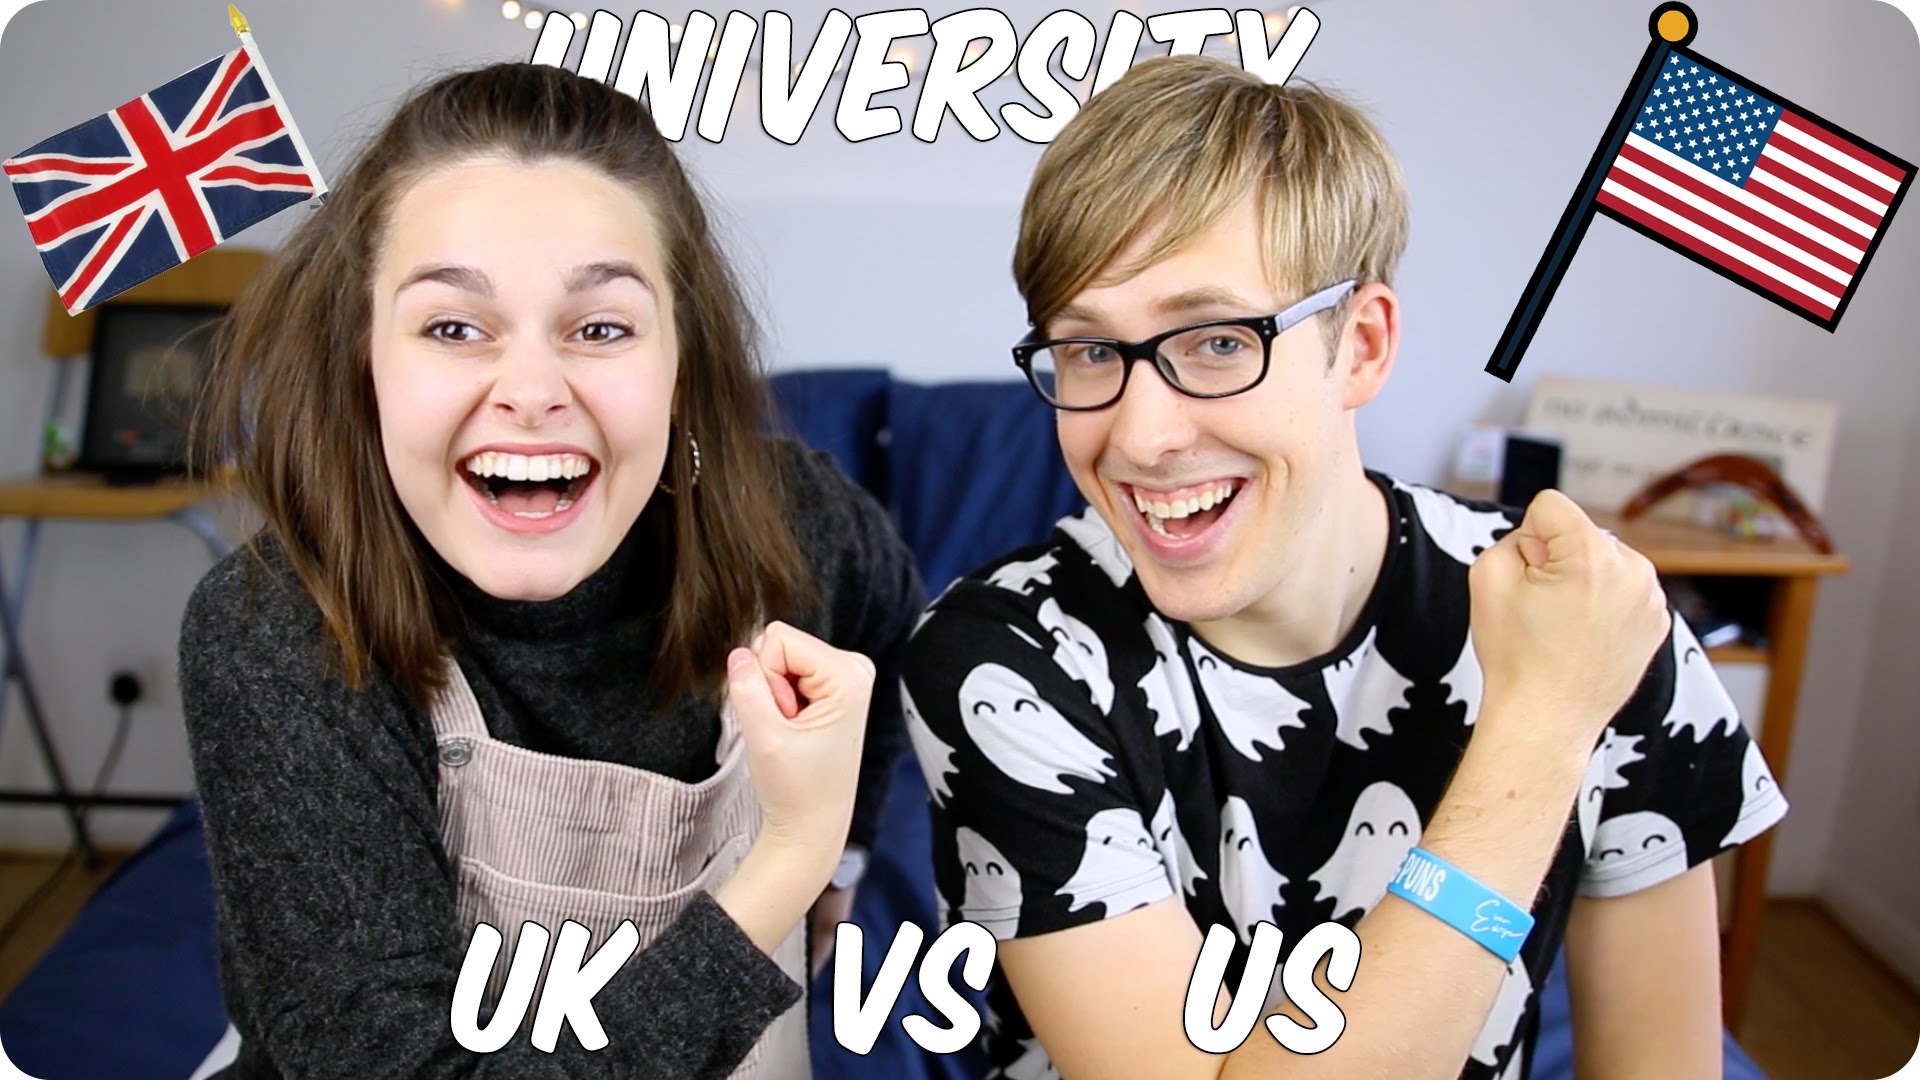 How different are American universities from the British universities?